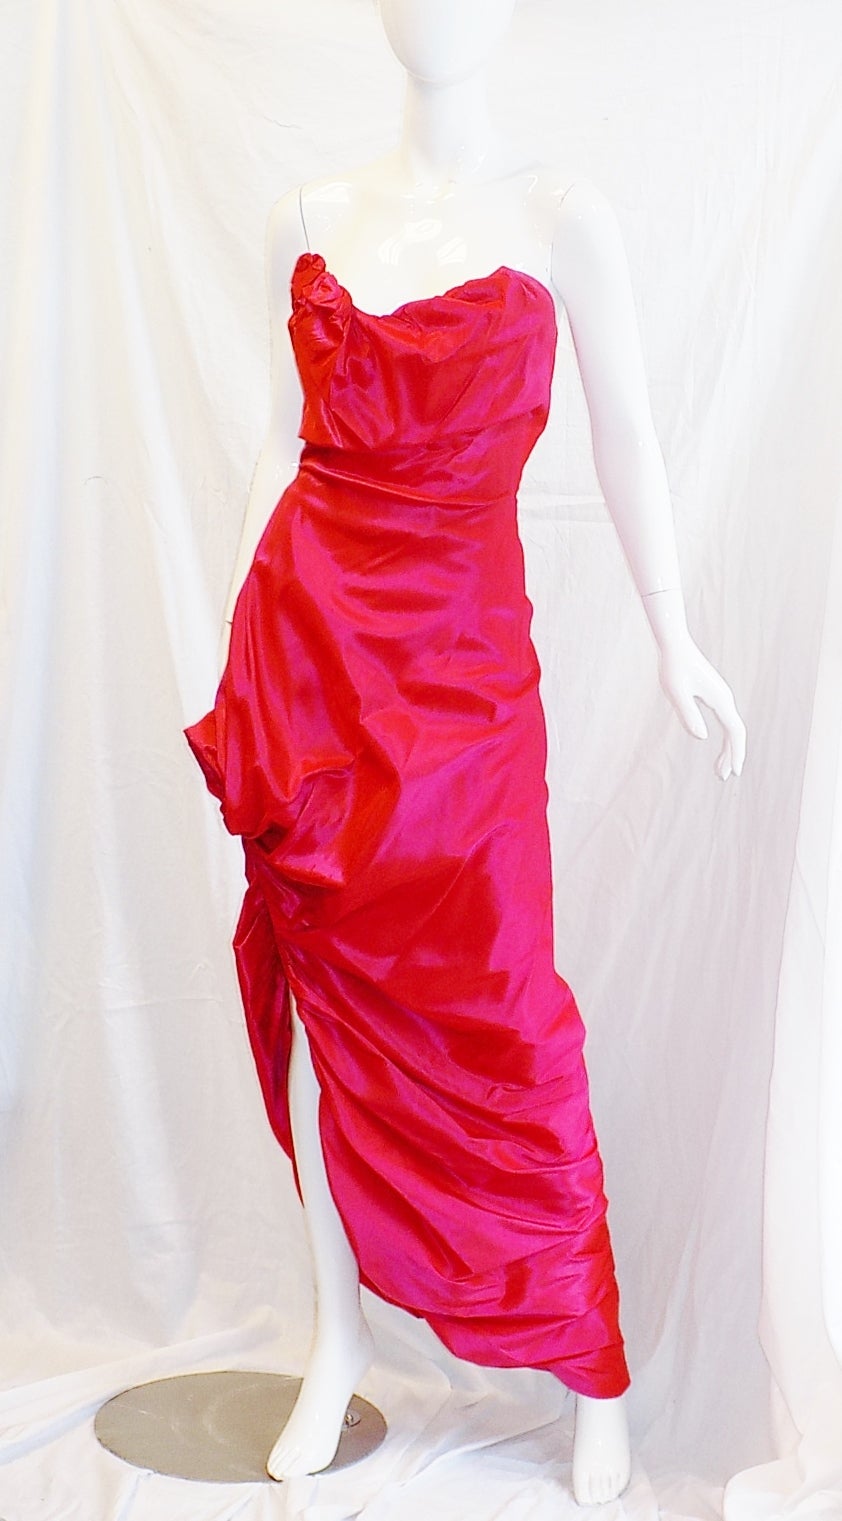 Women's Spectacular Vivienne Westwood strapless Corset  red  Draped  Gown dress For Sale